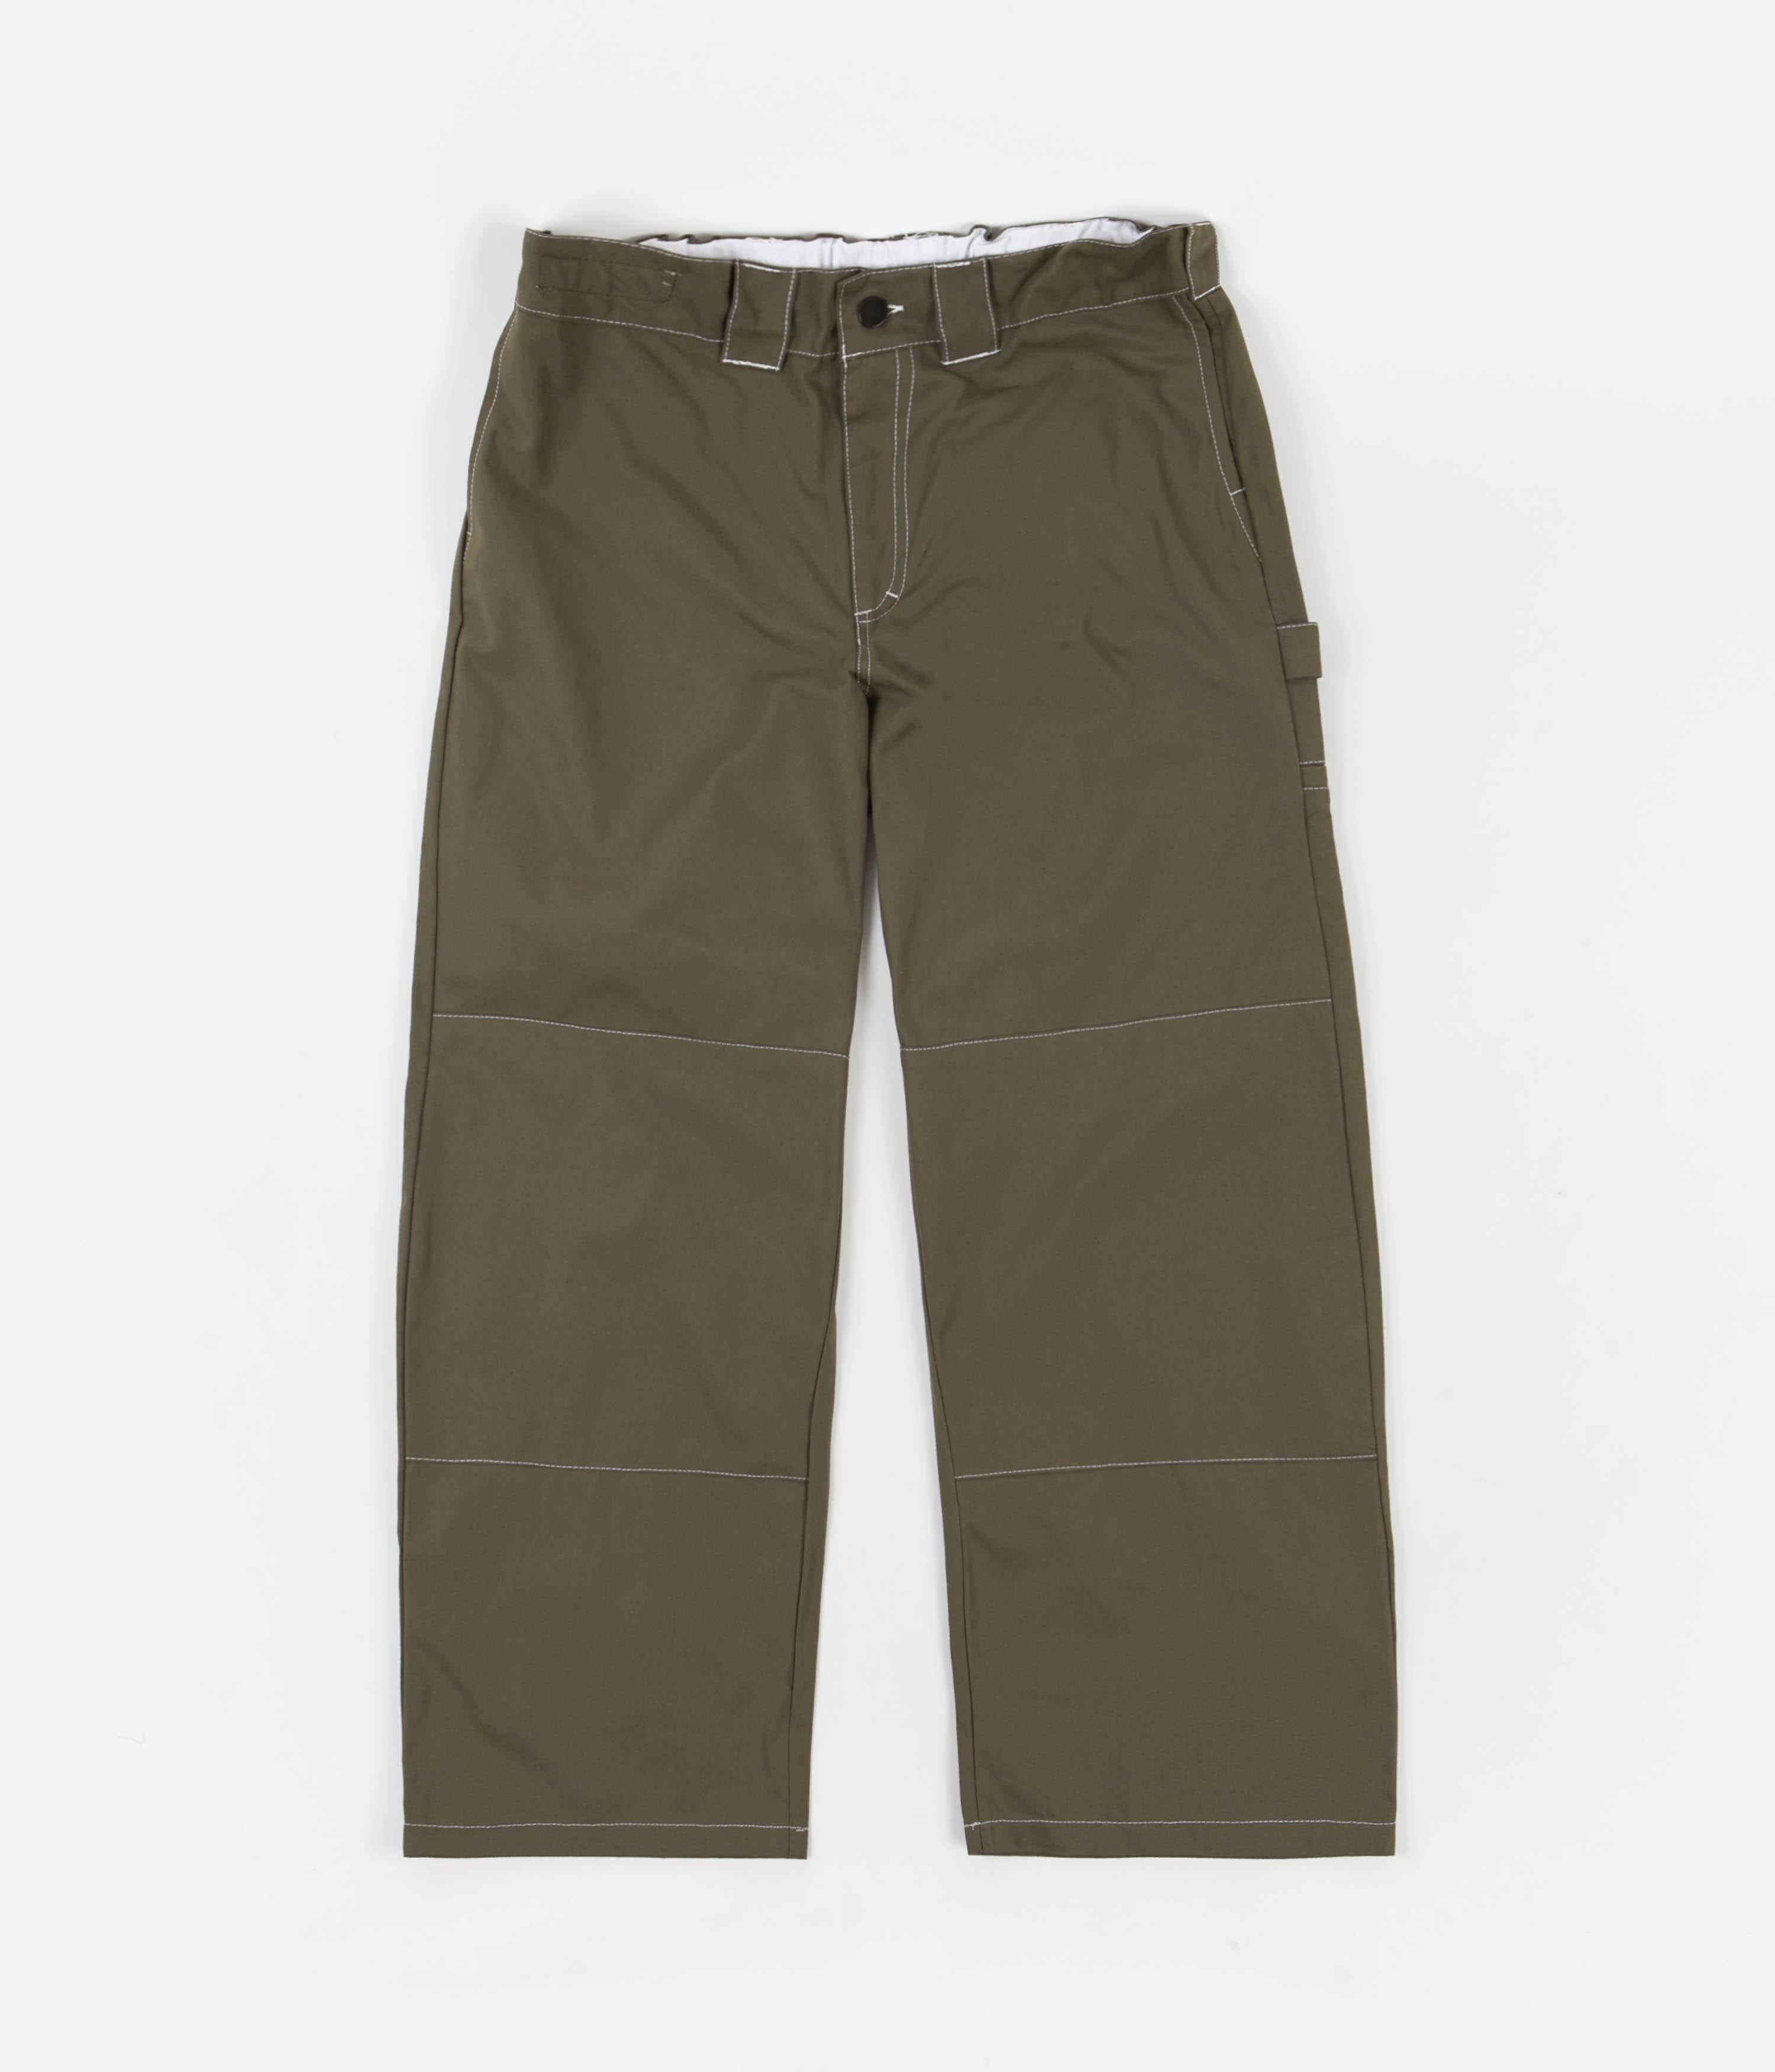 POETIC COLLECTIVE Sculptor Pants